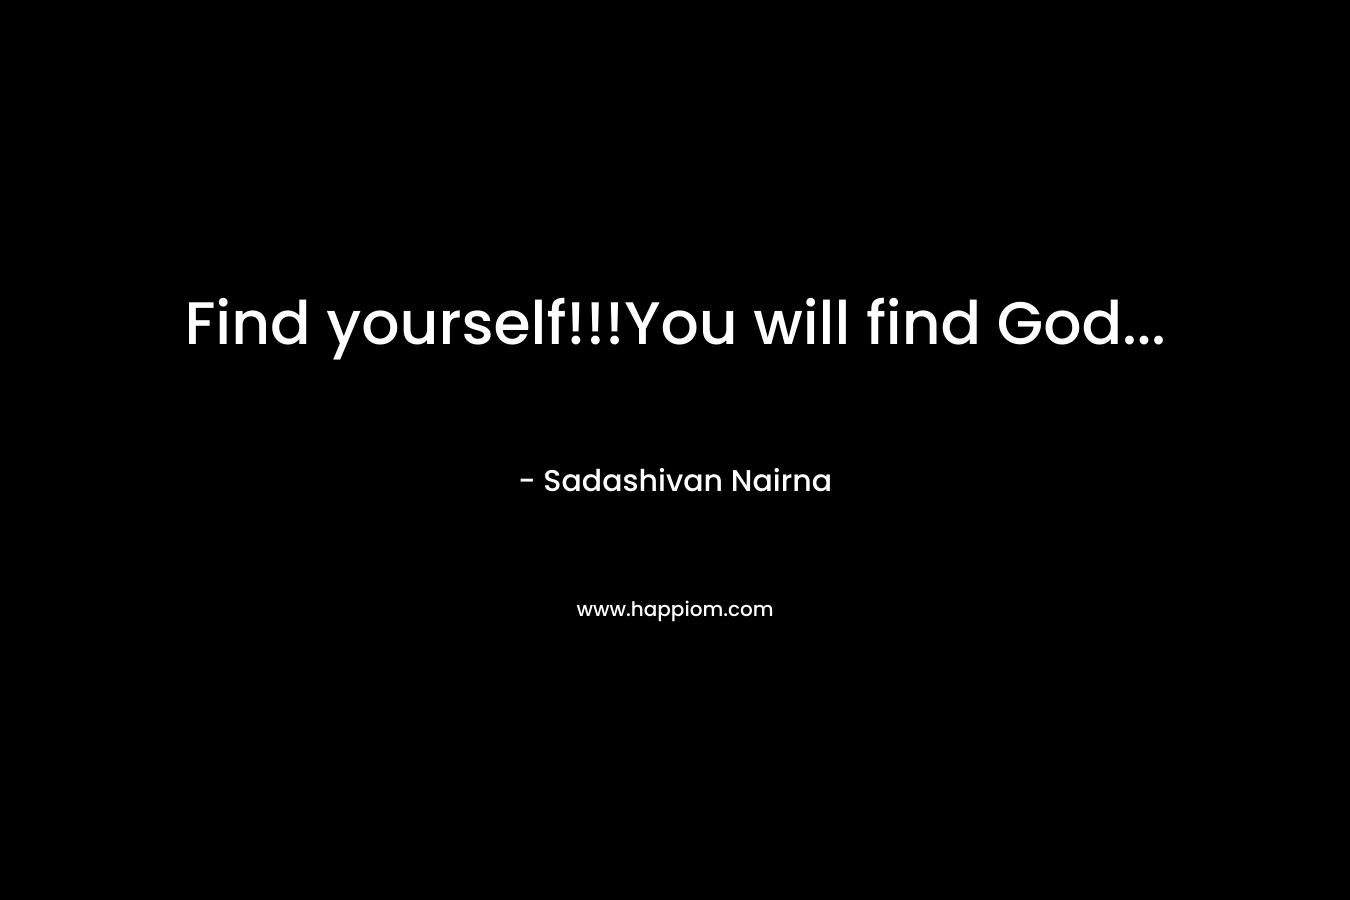 Find yourself!!!You will find God...